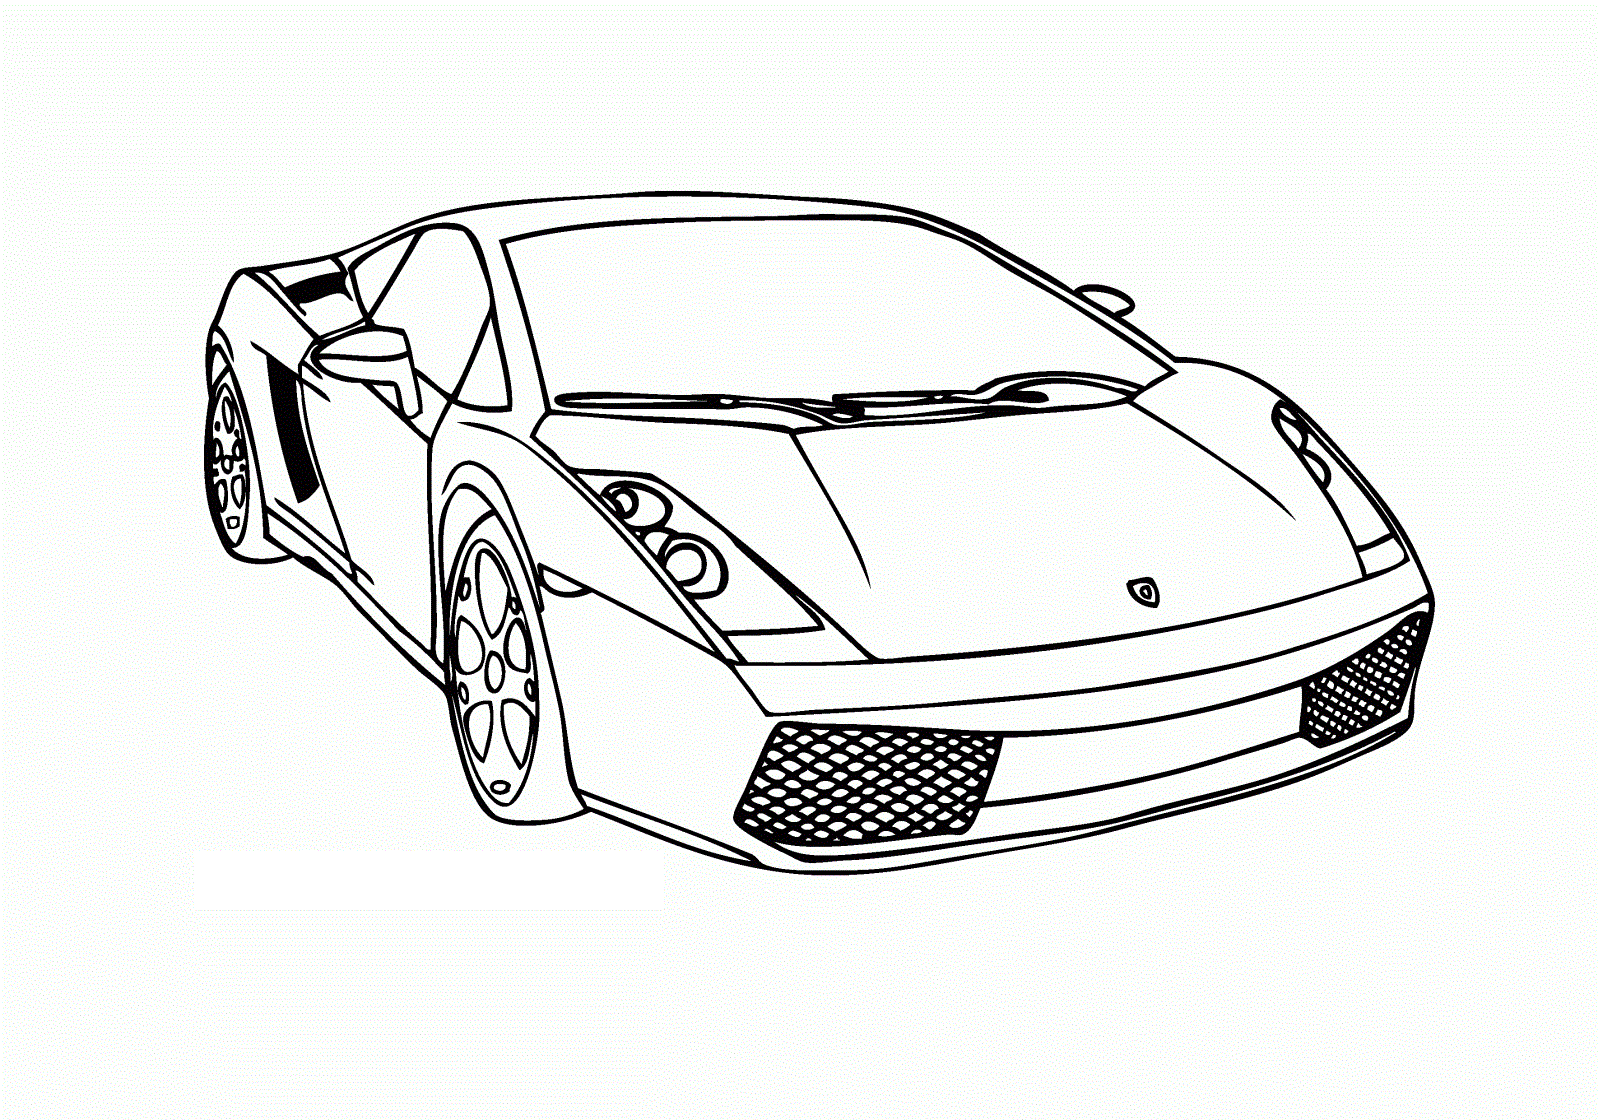  Cars Coloring Pages For Kids   4